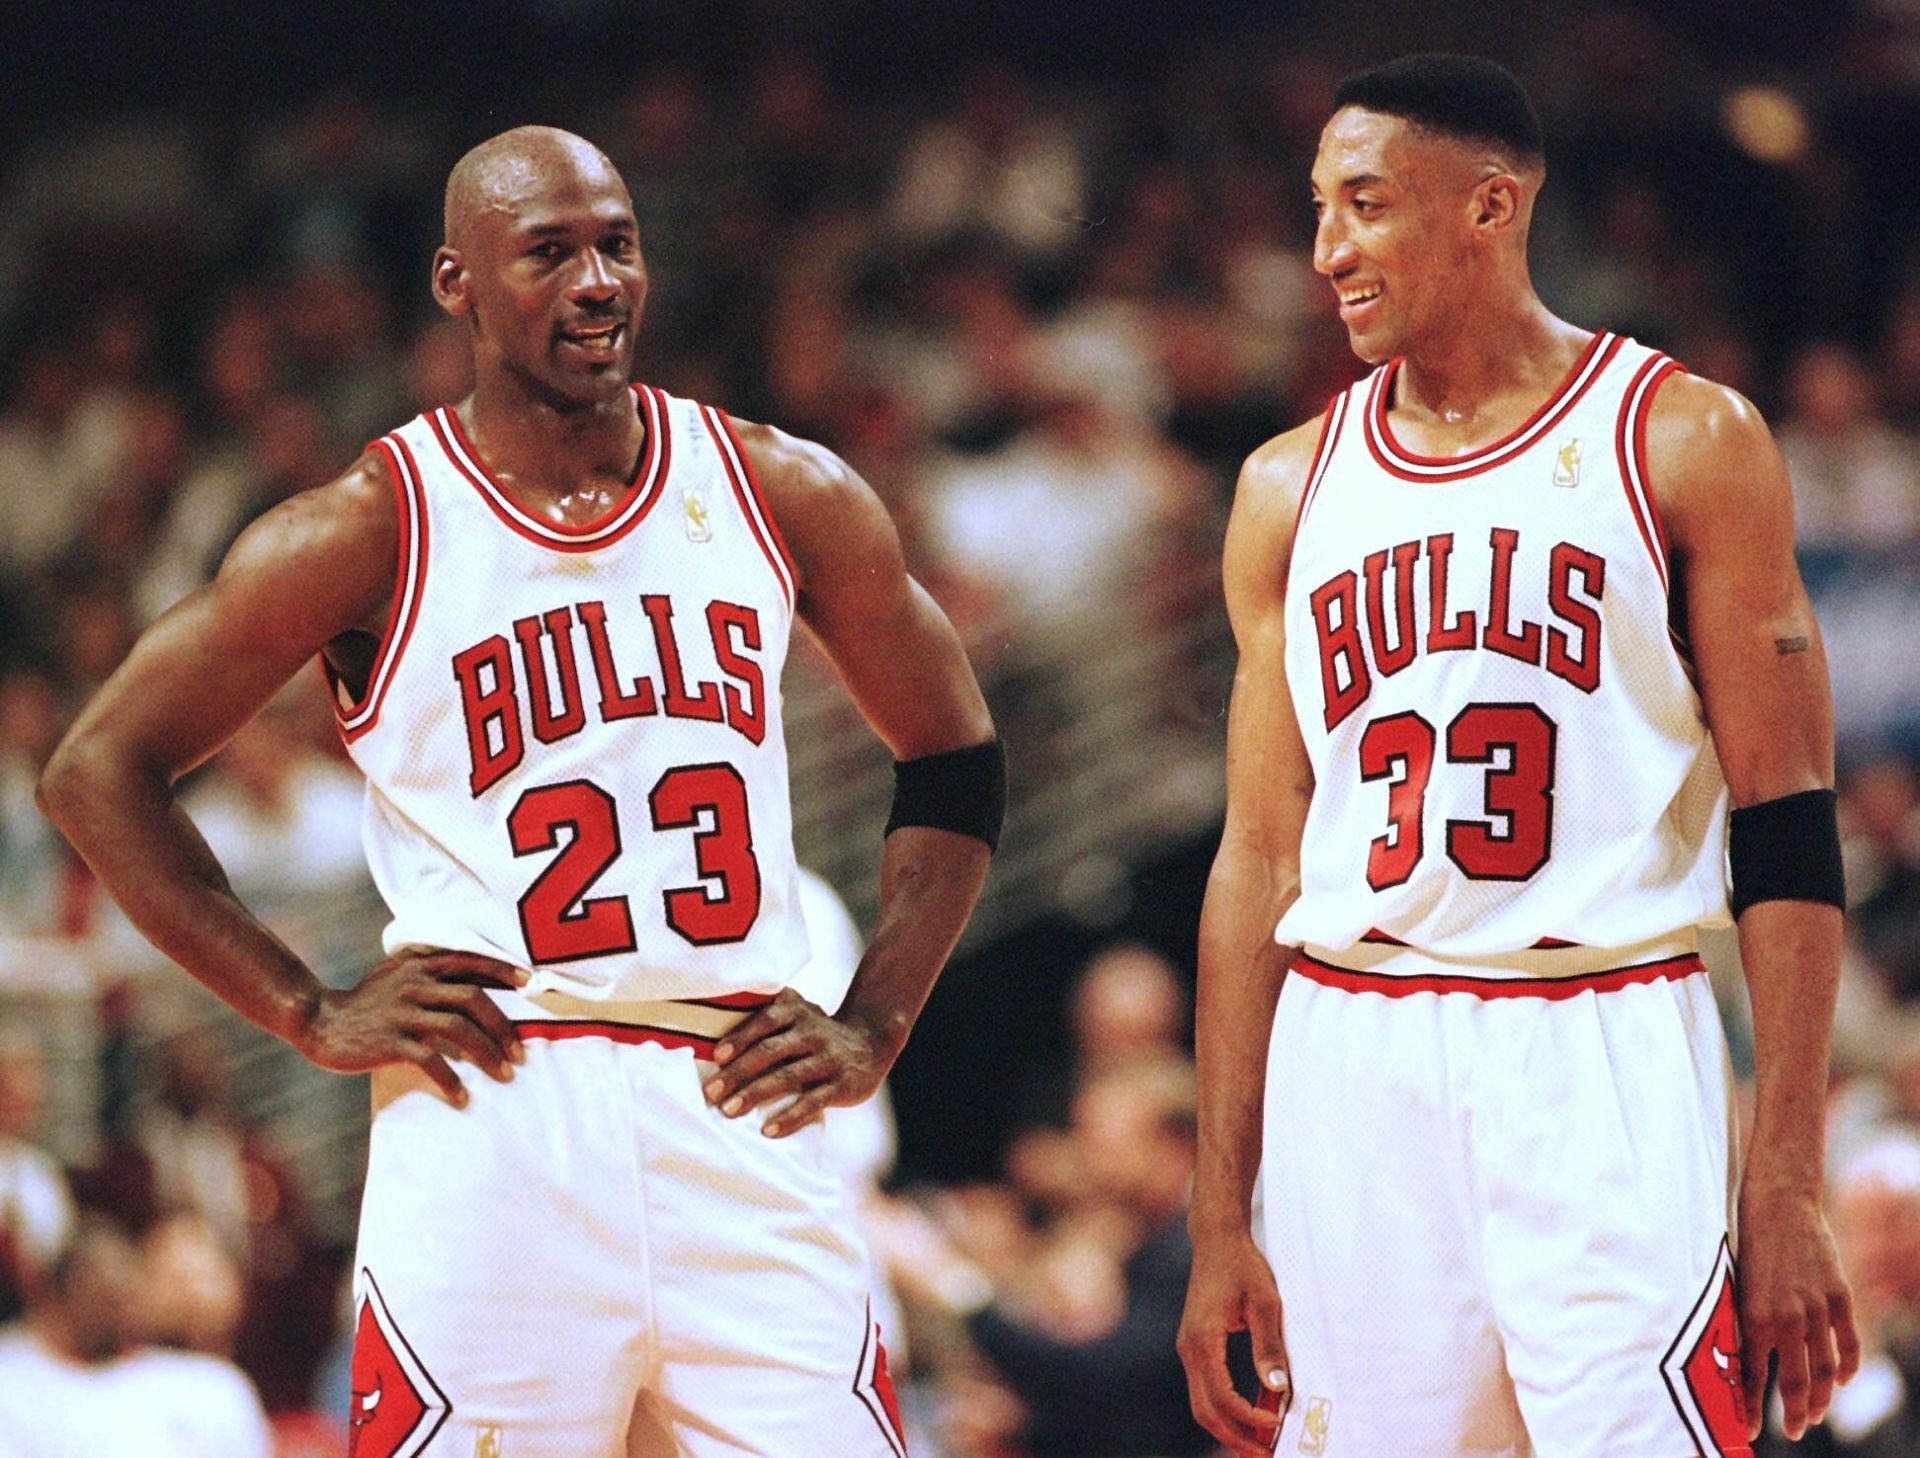 Michael Jordan and Scottie Pippen. (Photo: The New York Times)